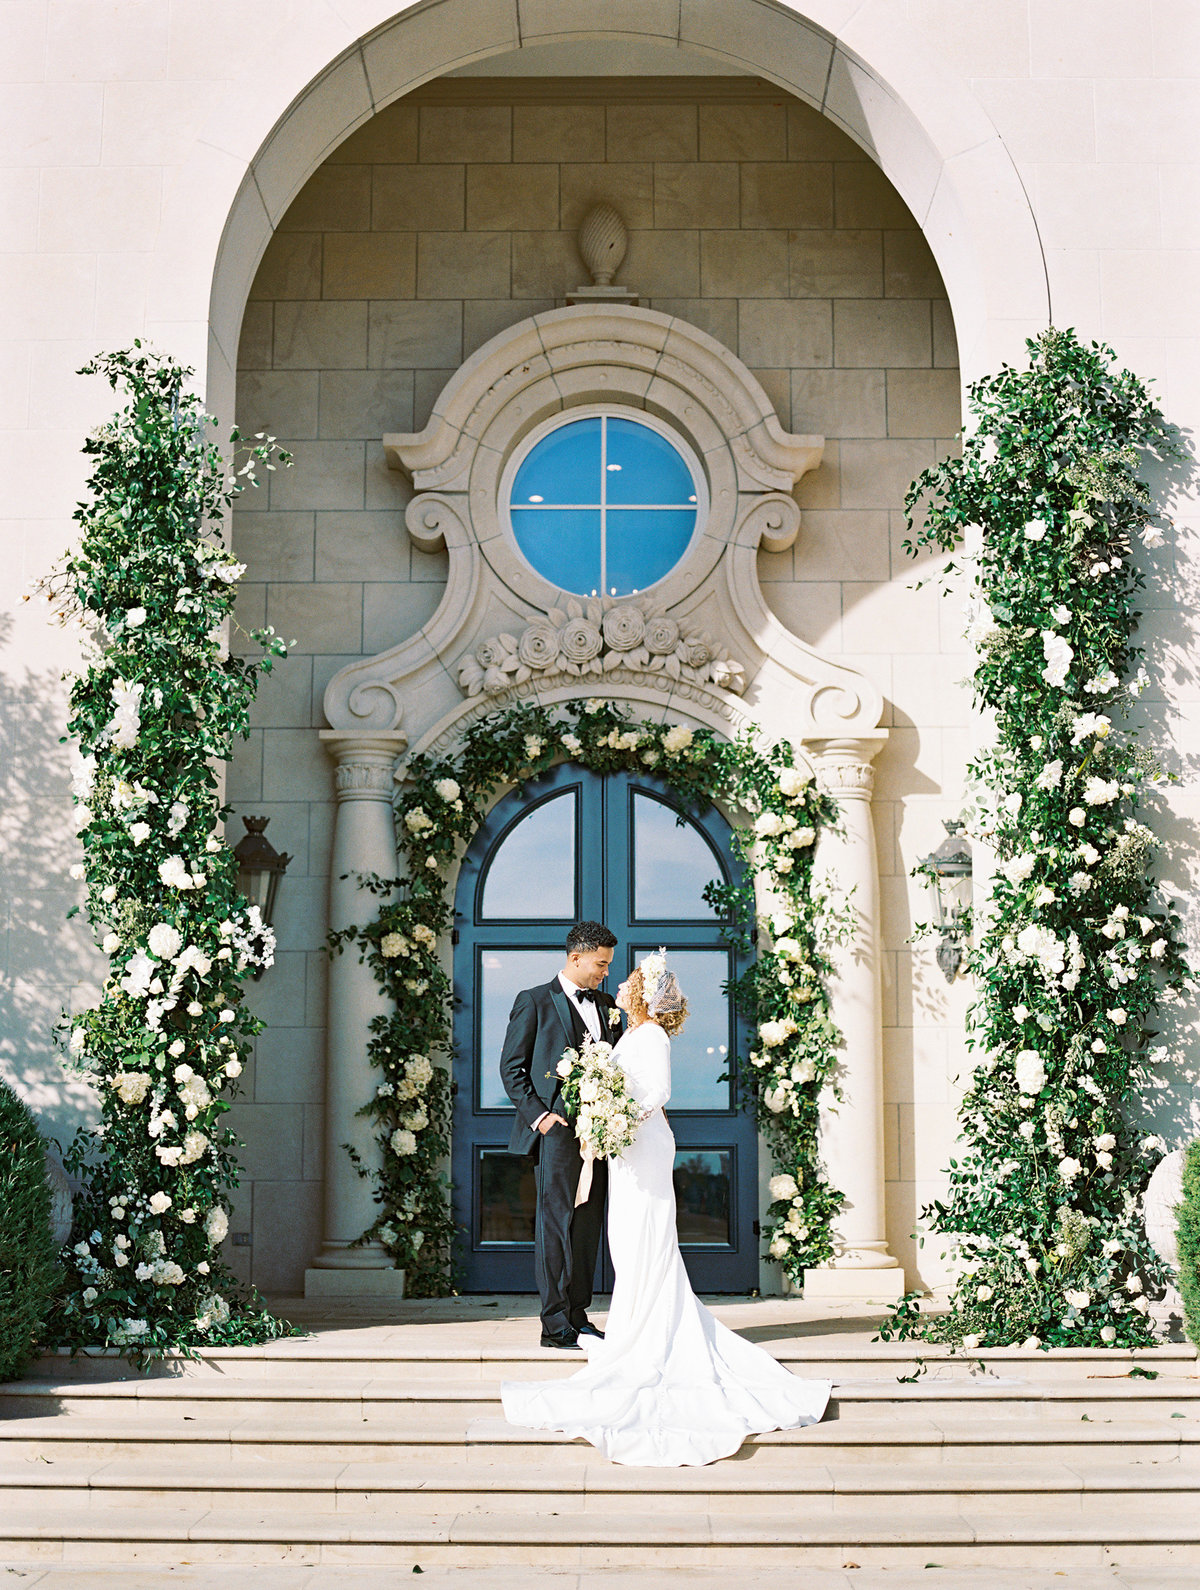 Romantic bride and groom portraits surrounded by lush floral at a Virginia Wedding Venue